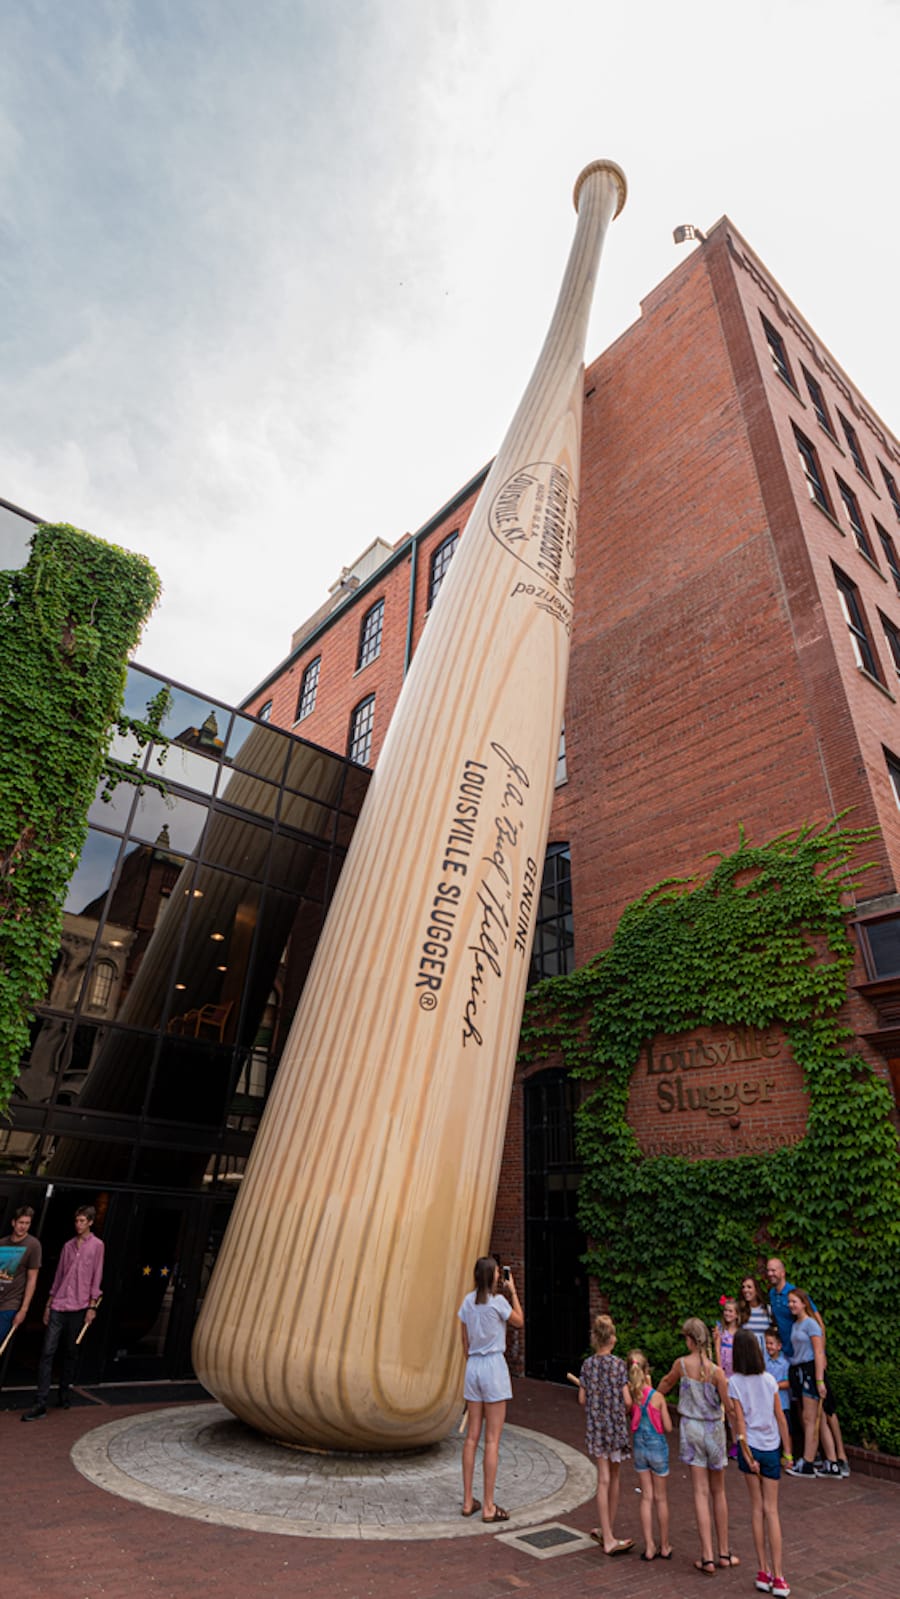 Louisville slugger museum is a great destination in the South for couples to explore.